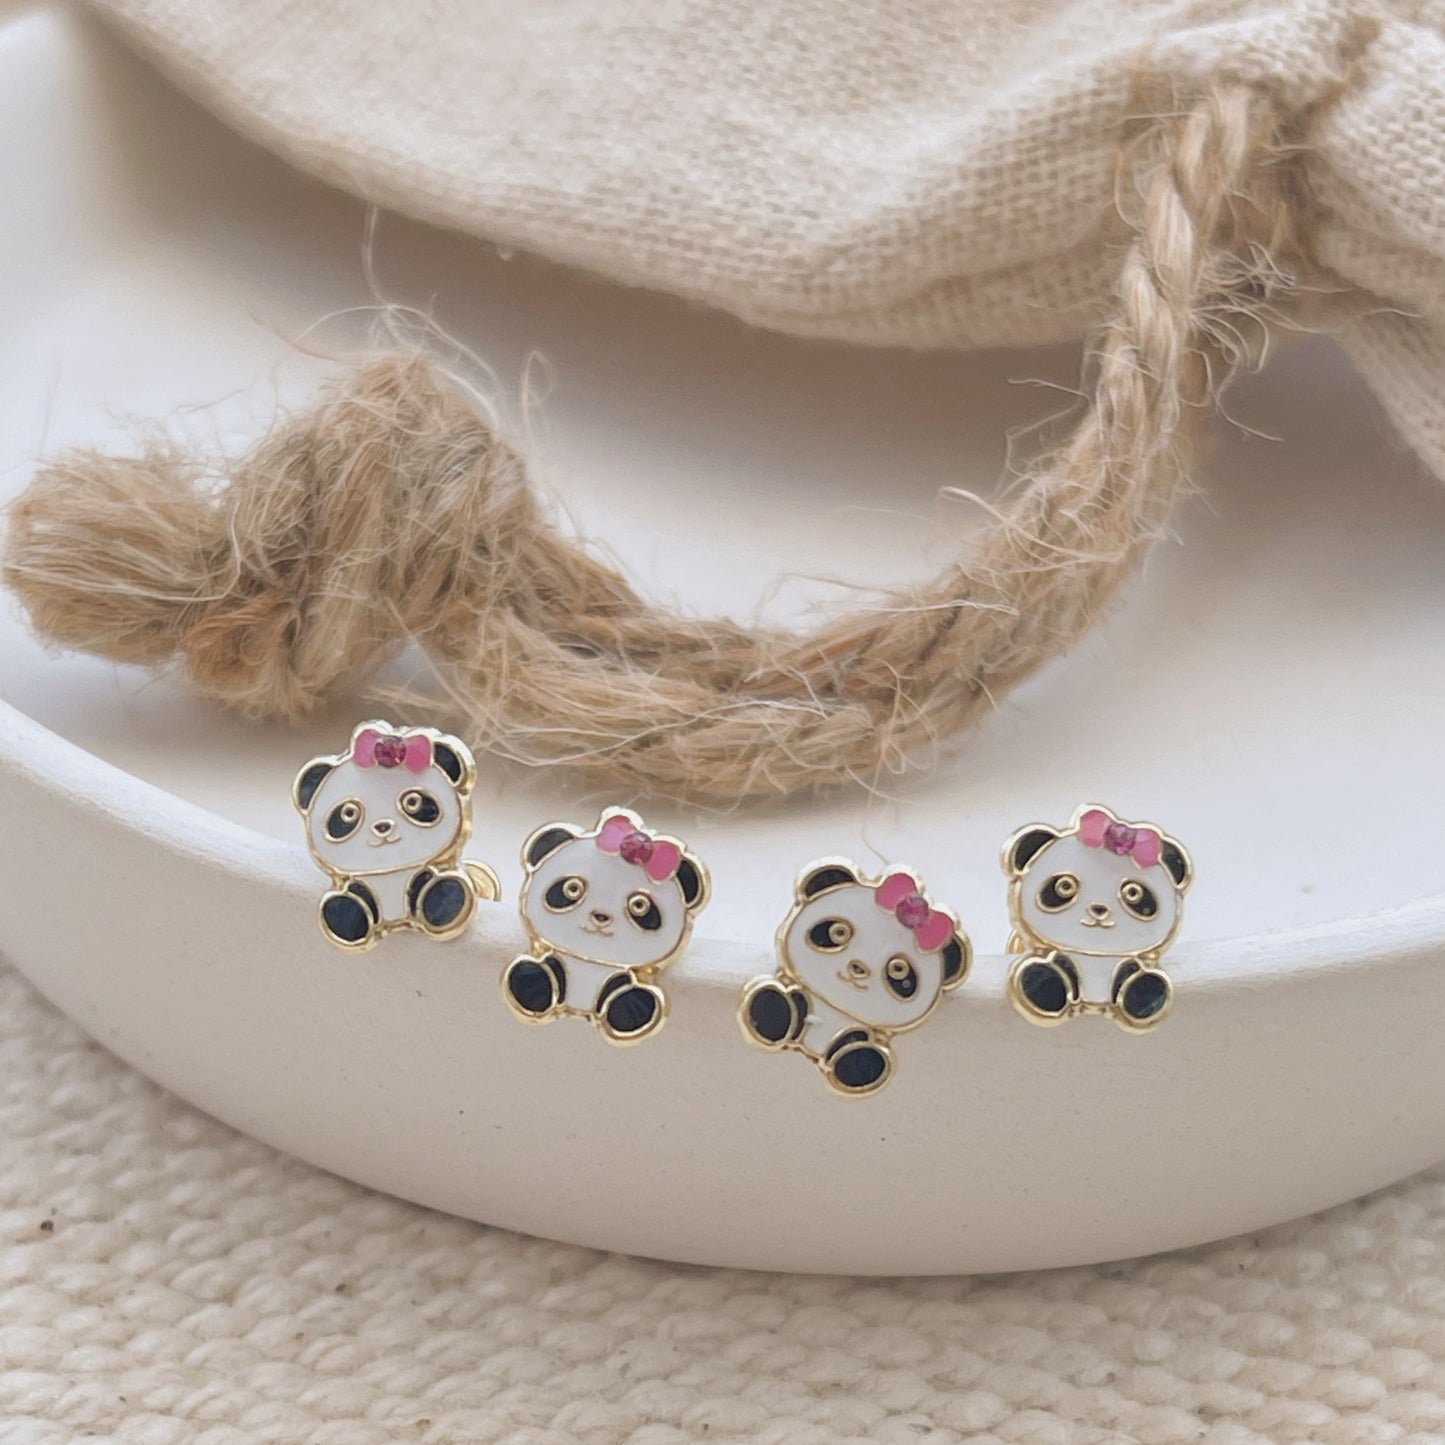 These cute little panda stud earrings are a great addition to your earring collection. These are perfect for everyday wear and make a wonderful gift for anyone who loves pandas, especially kids!